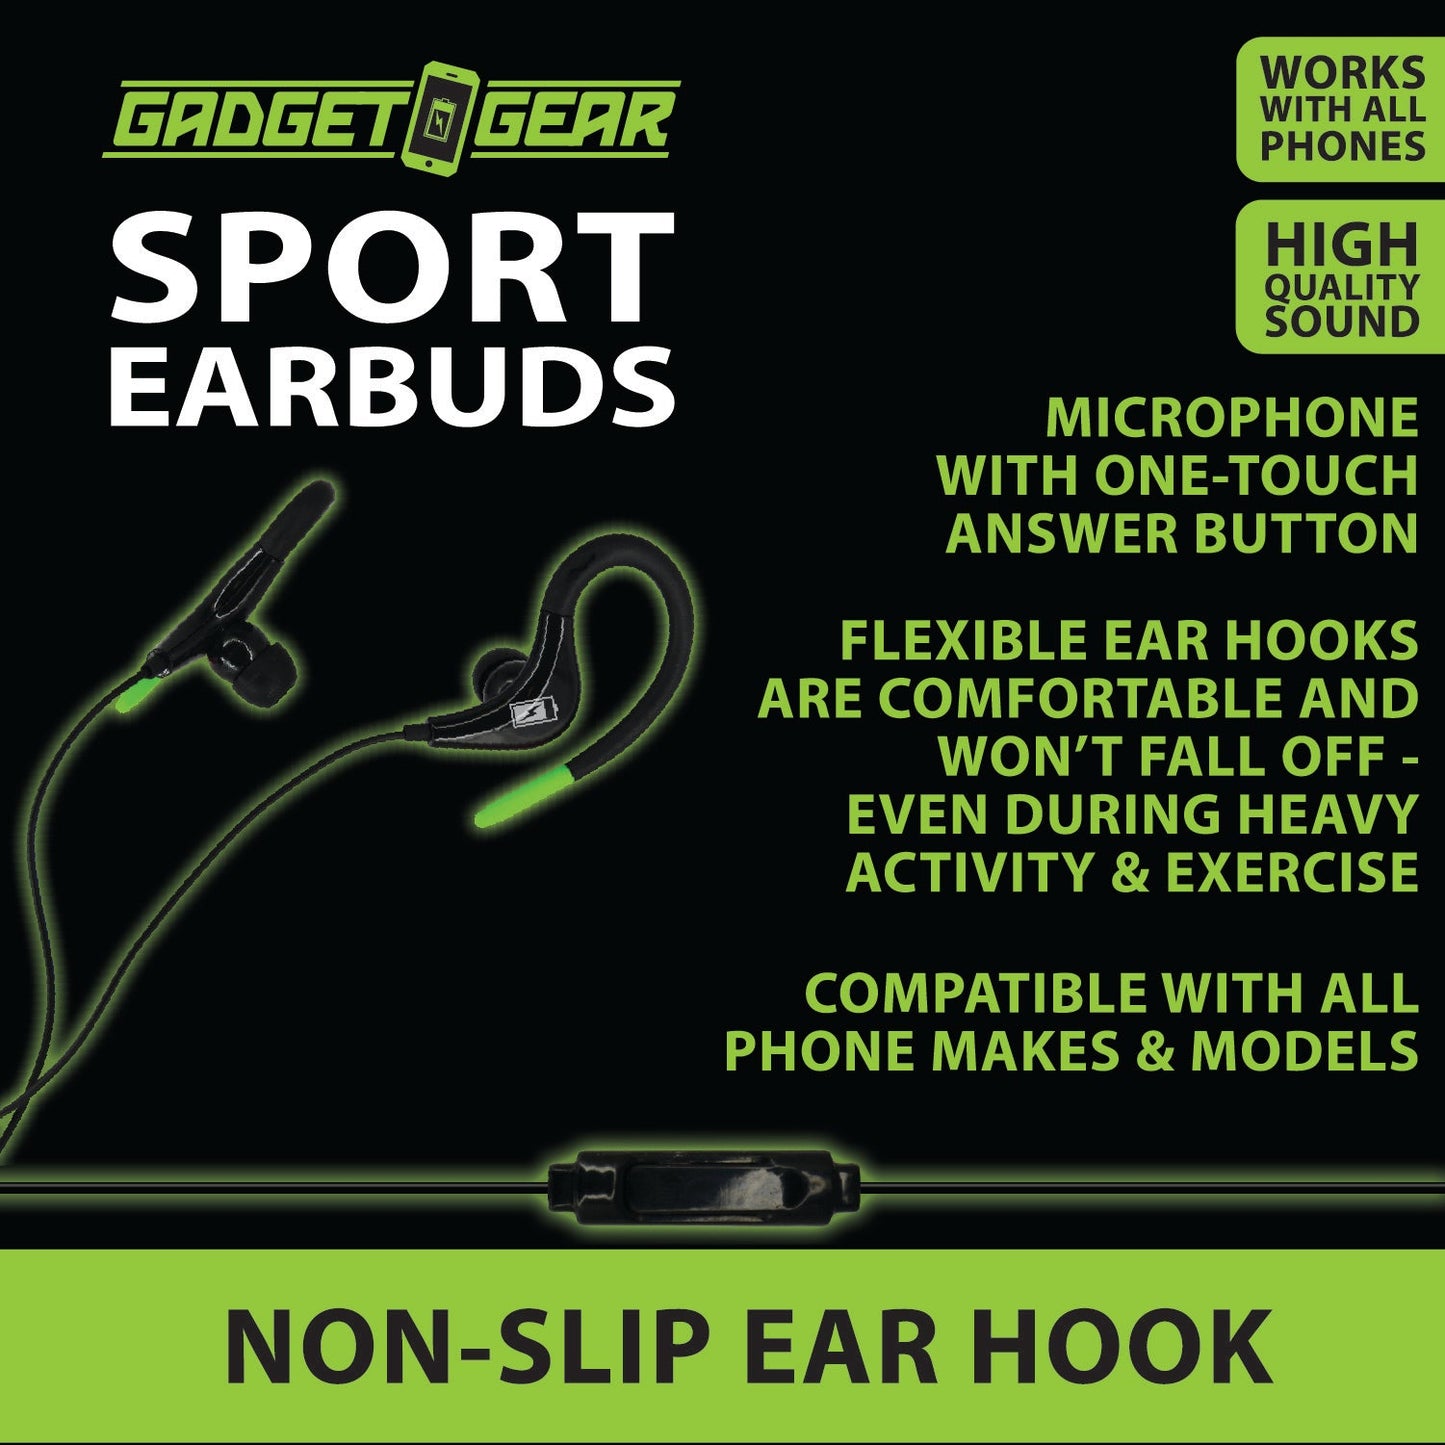 ITEM NUMBER 020777 GG SPORT EARBUDS 3 PIECES PER PACK